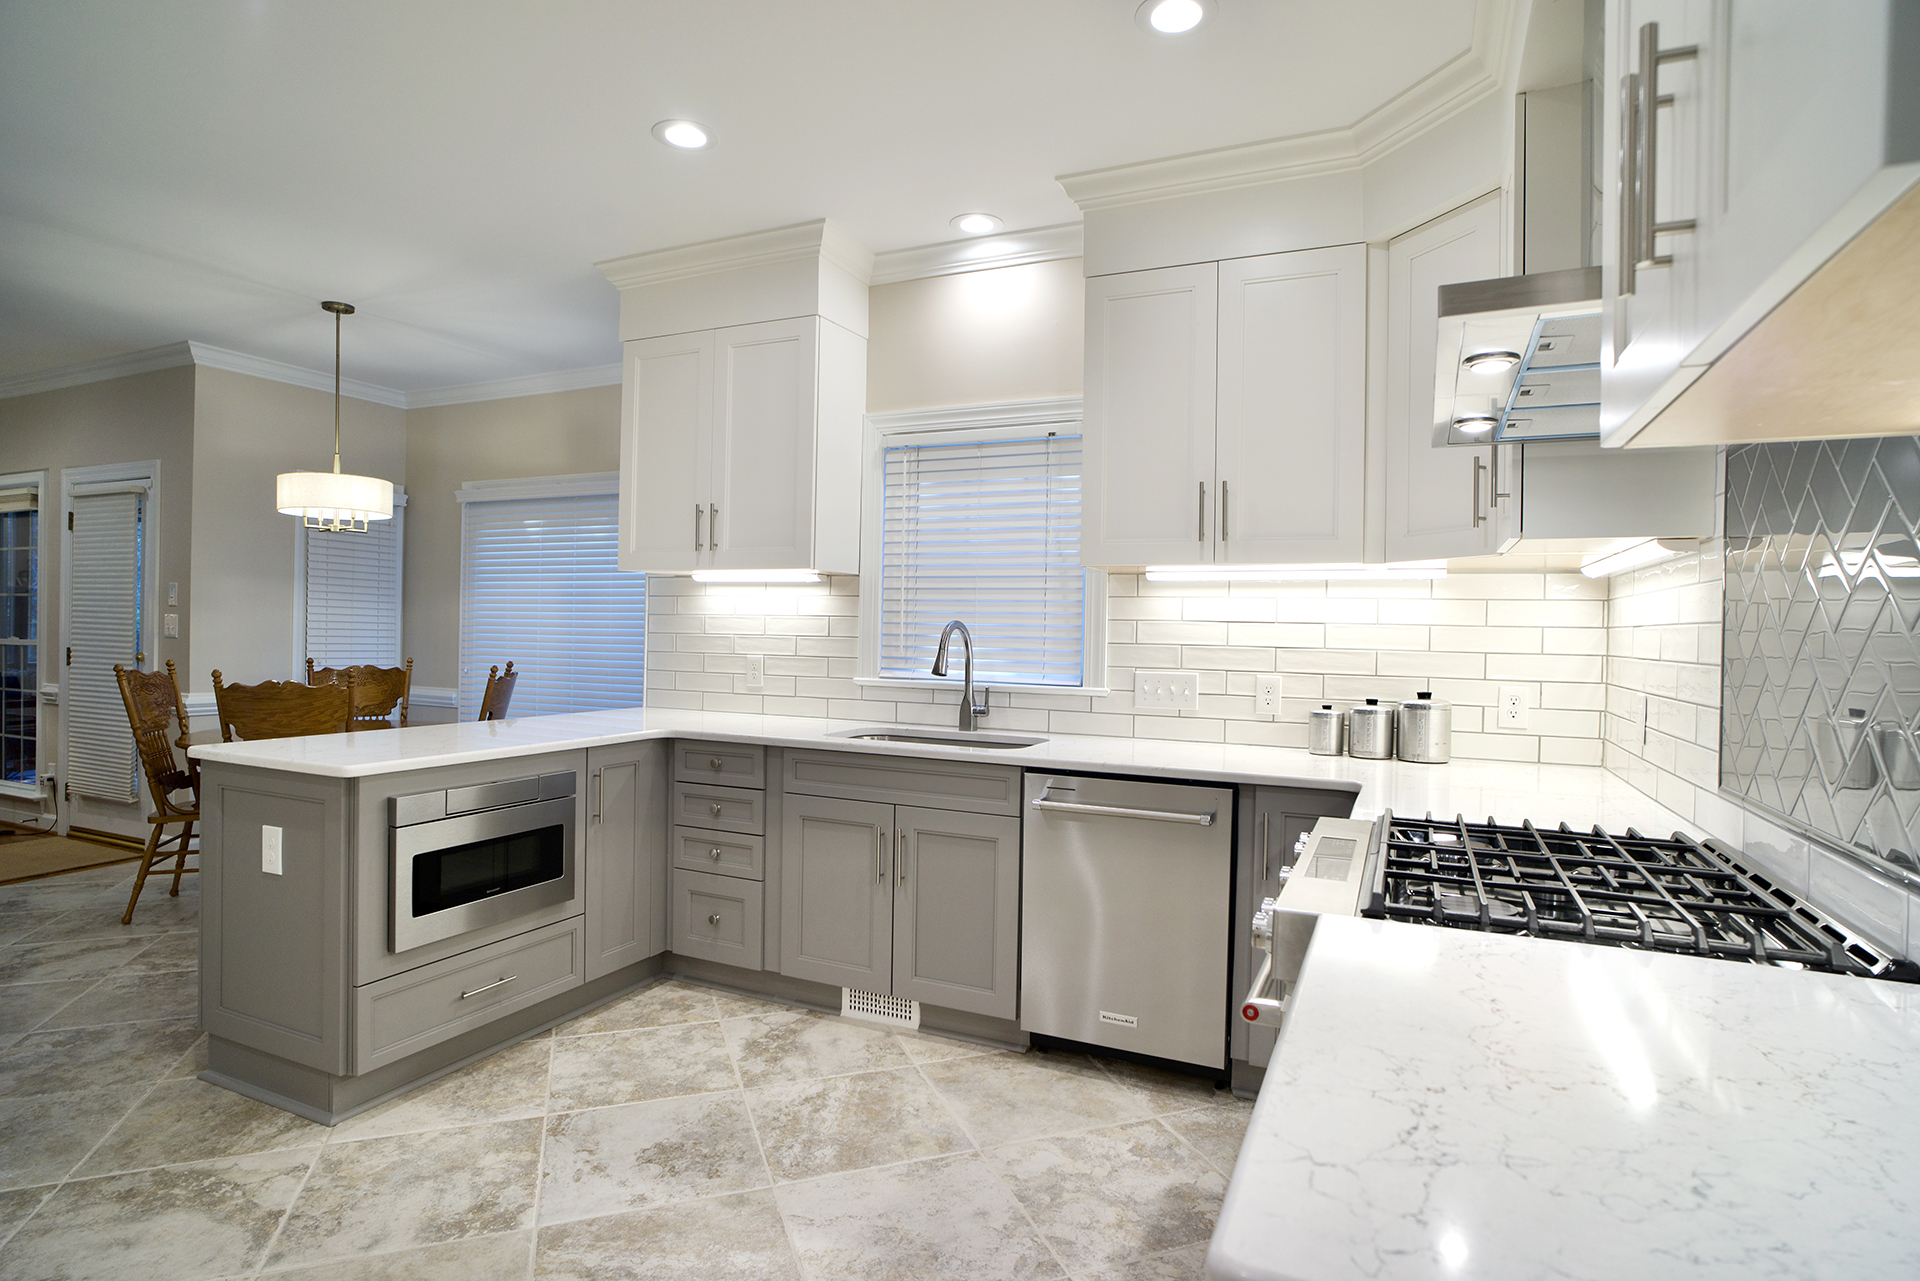 Riverbirch kitchen Remodeling and Design in Cary NC